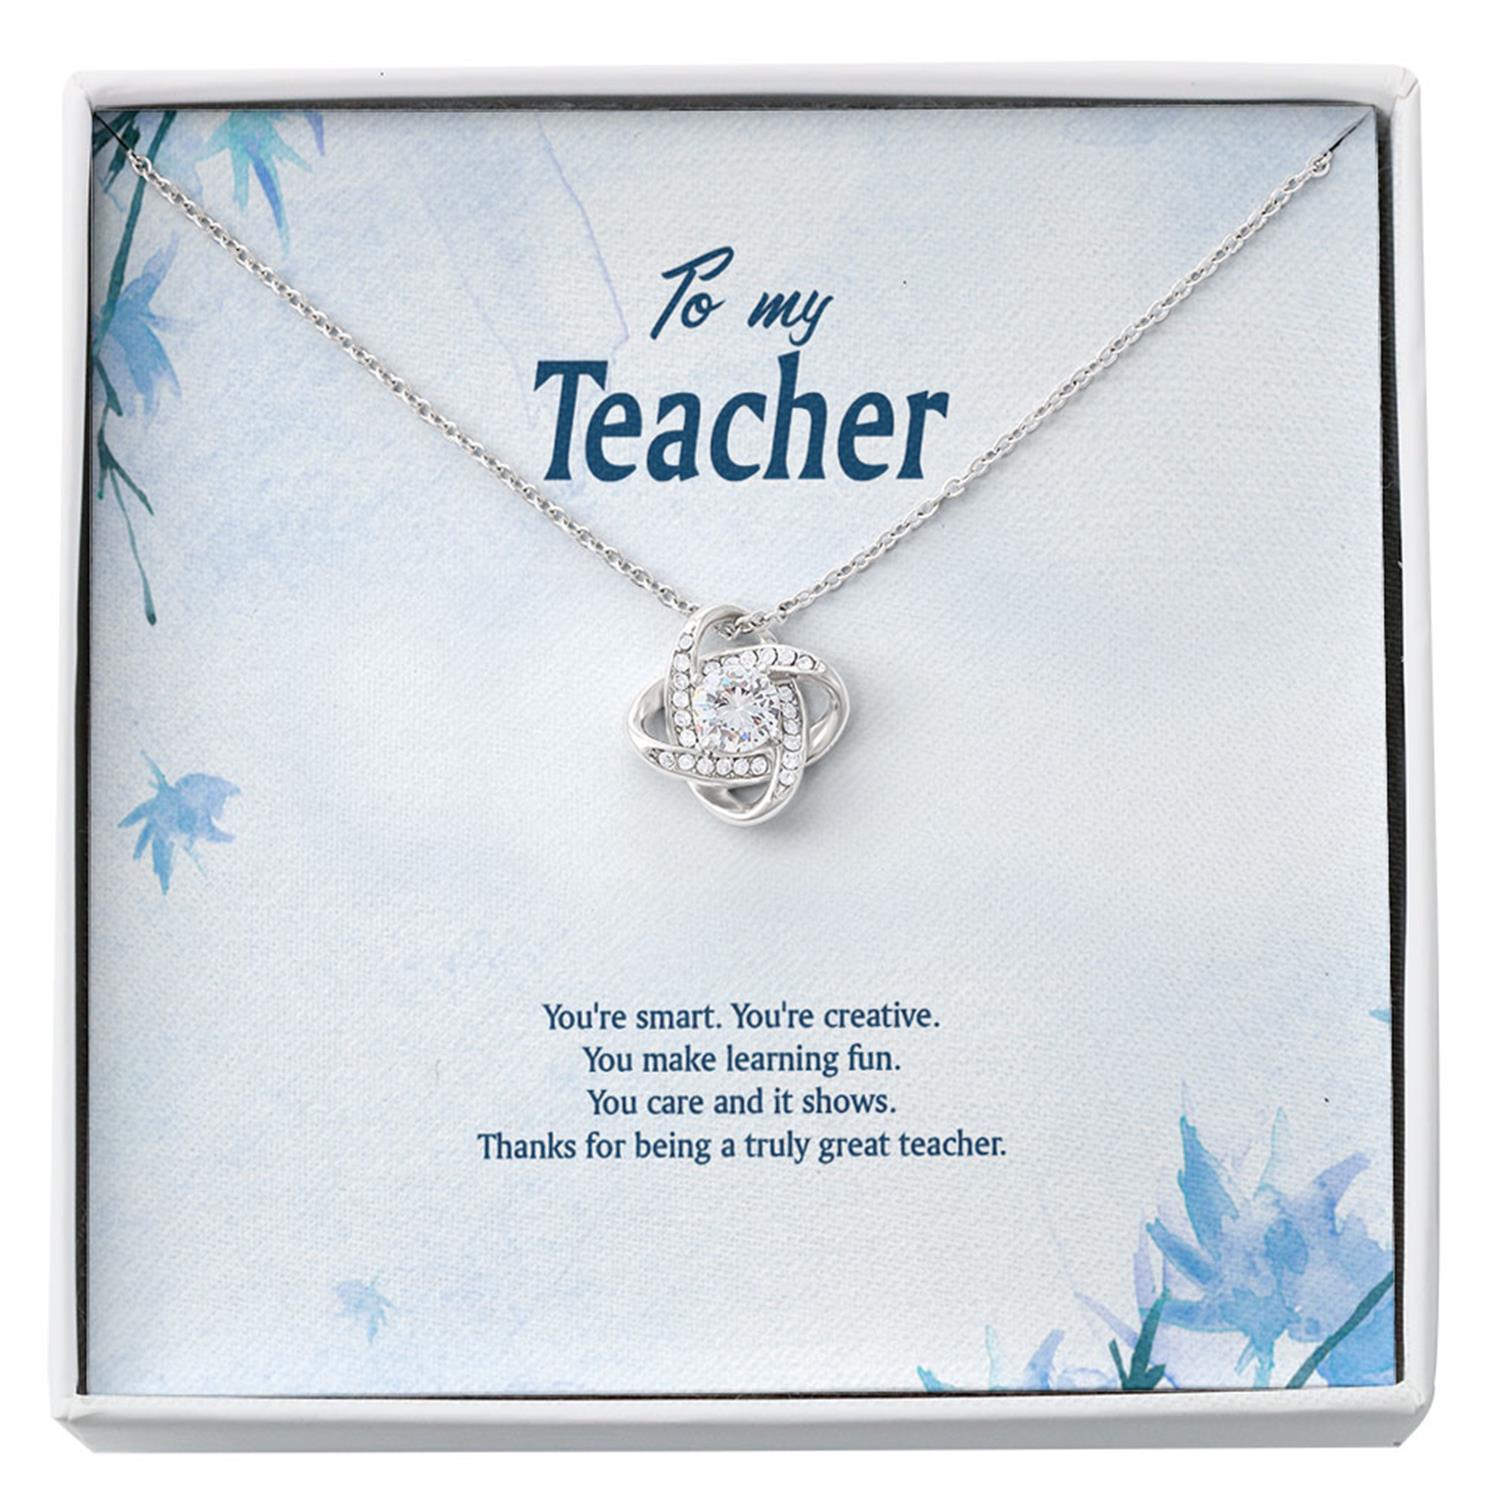 Teacher Necklace, To My Teacher Necklace Gift - Thank You To Teacher Inseparable Custom Necklace